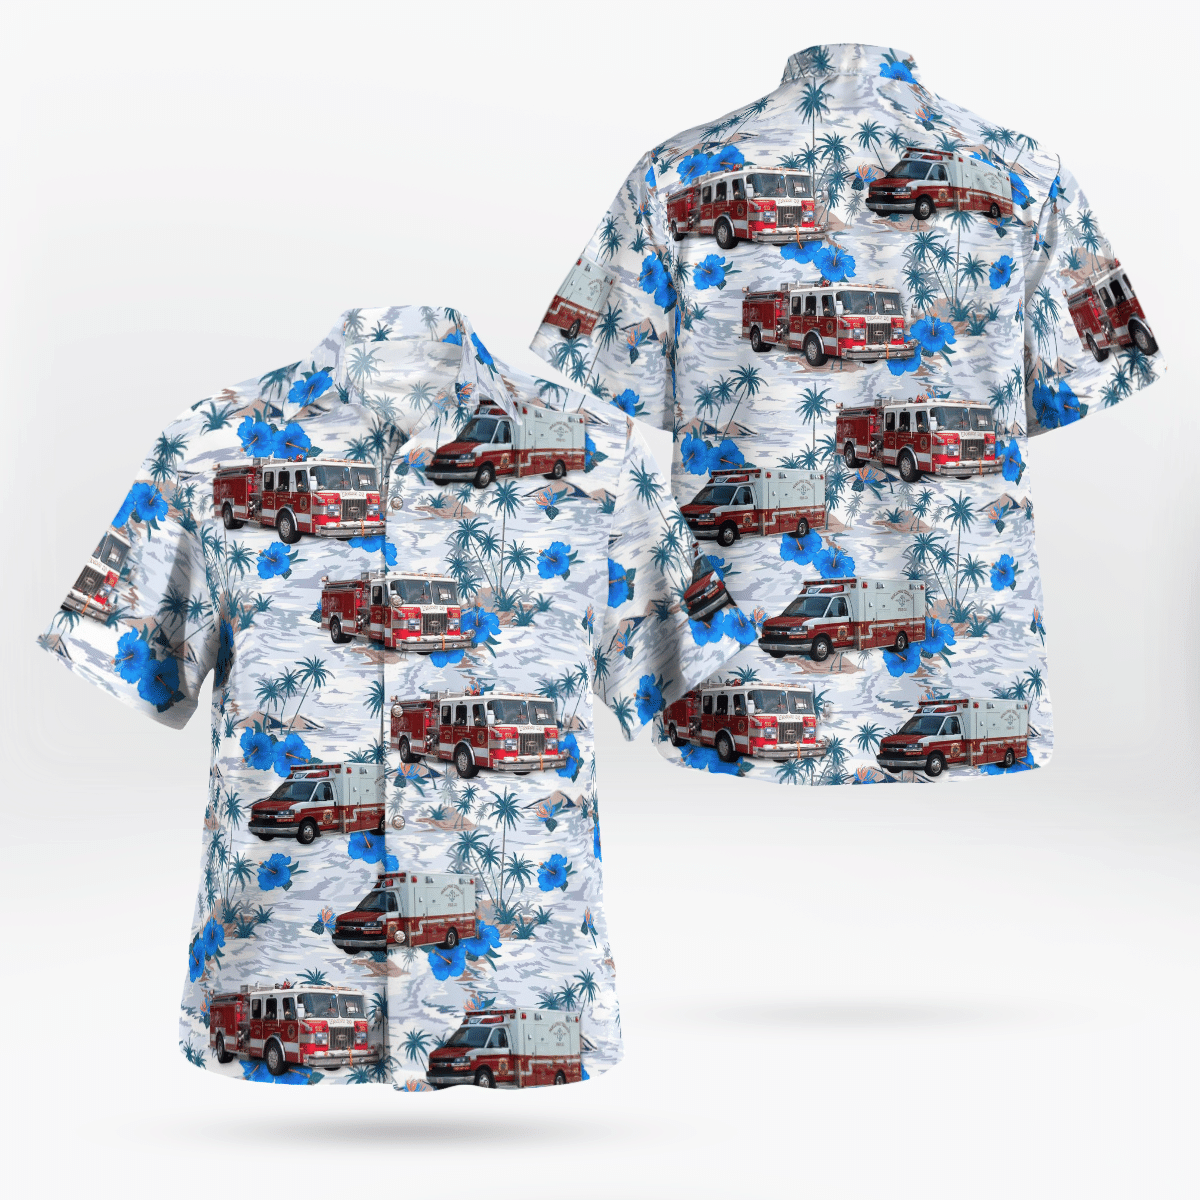 If you are in need of a new summertime look, pick up this Hawaiian shirt 78